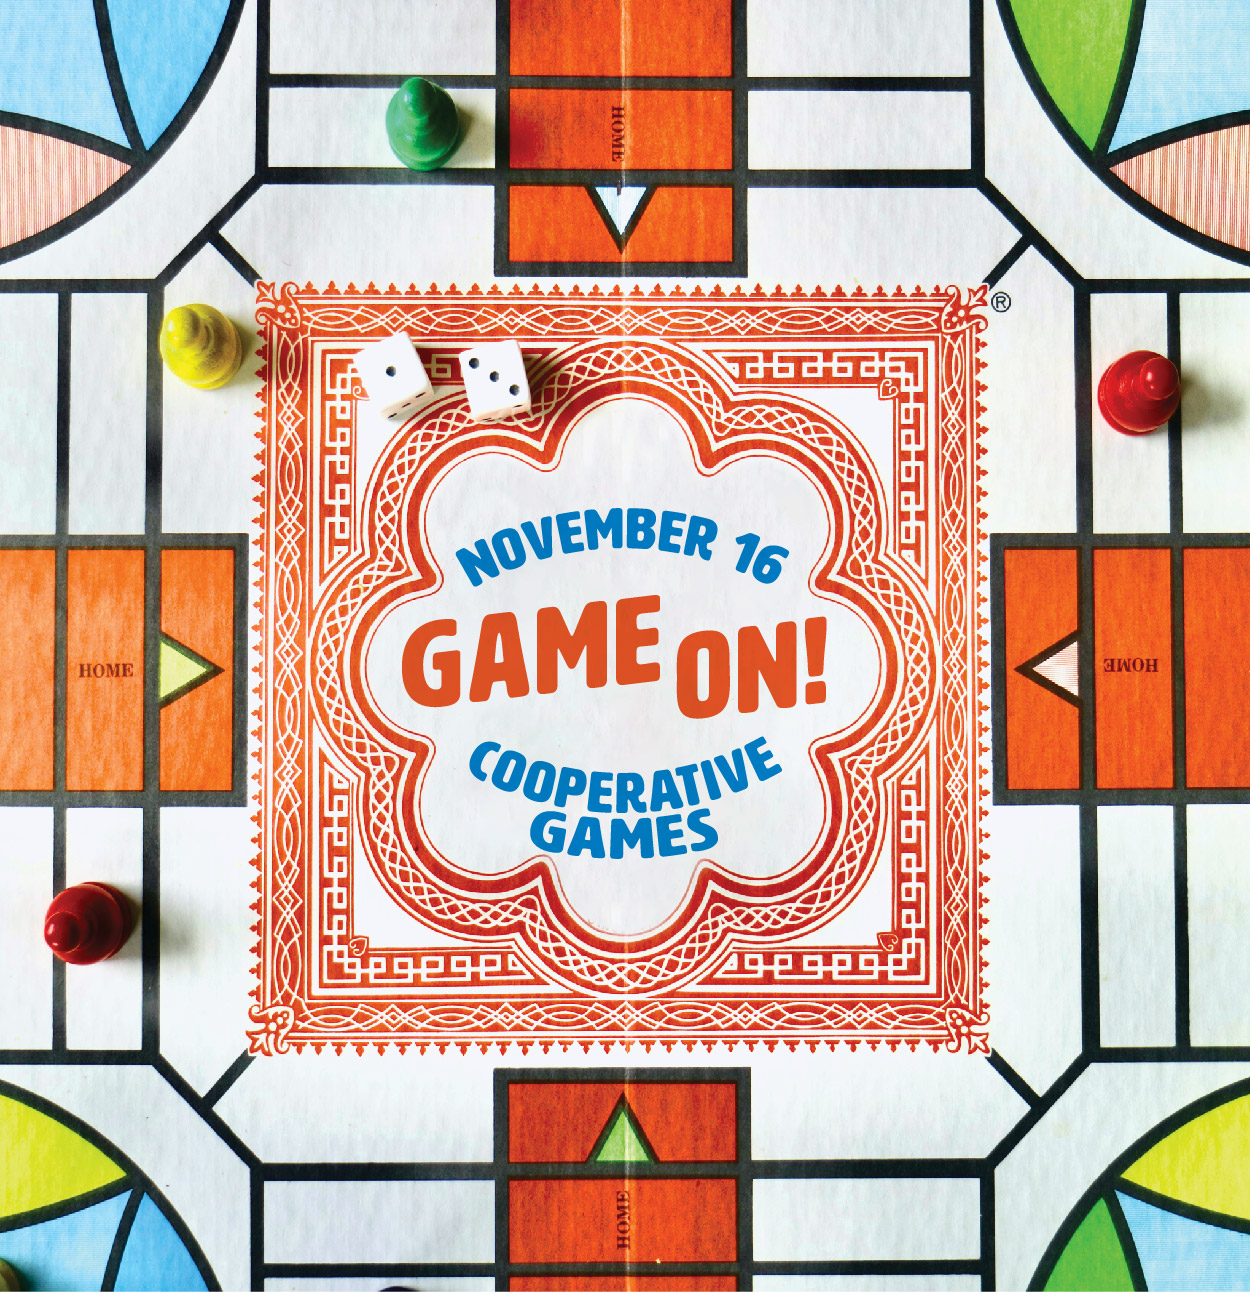 November 16 Game On! Cooperative Games